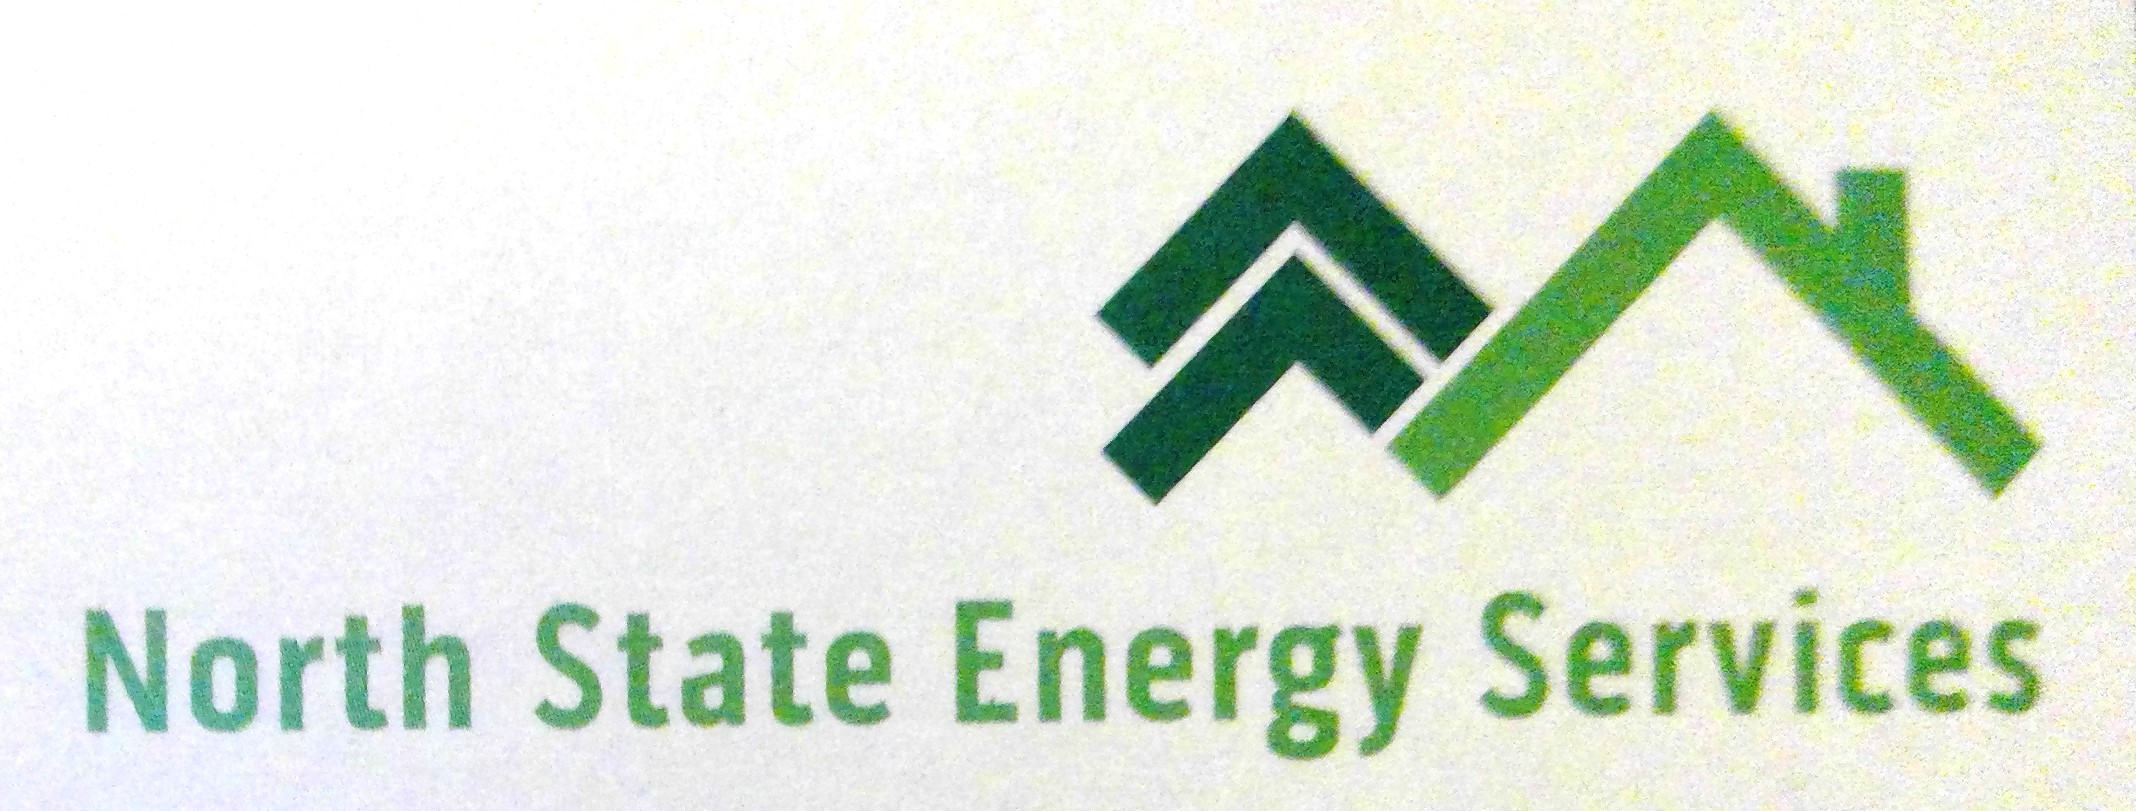 NORTH STATE ENERGY SERVICES company logo